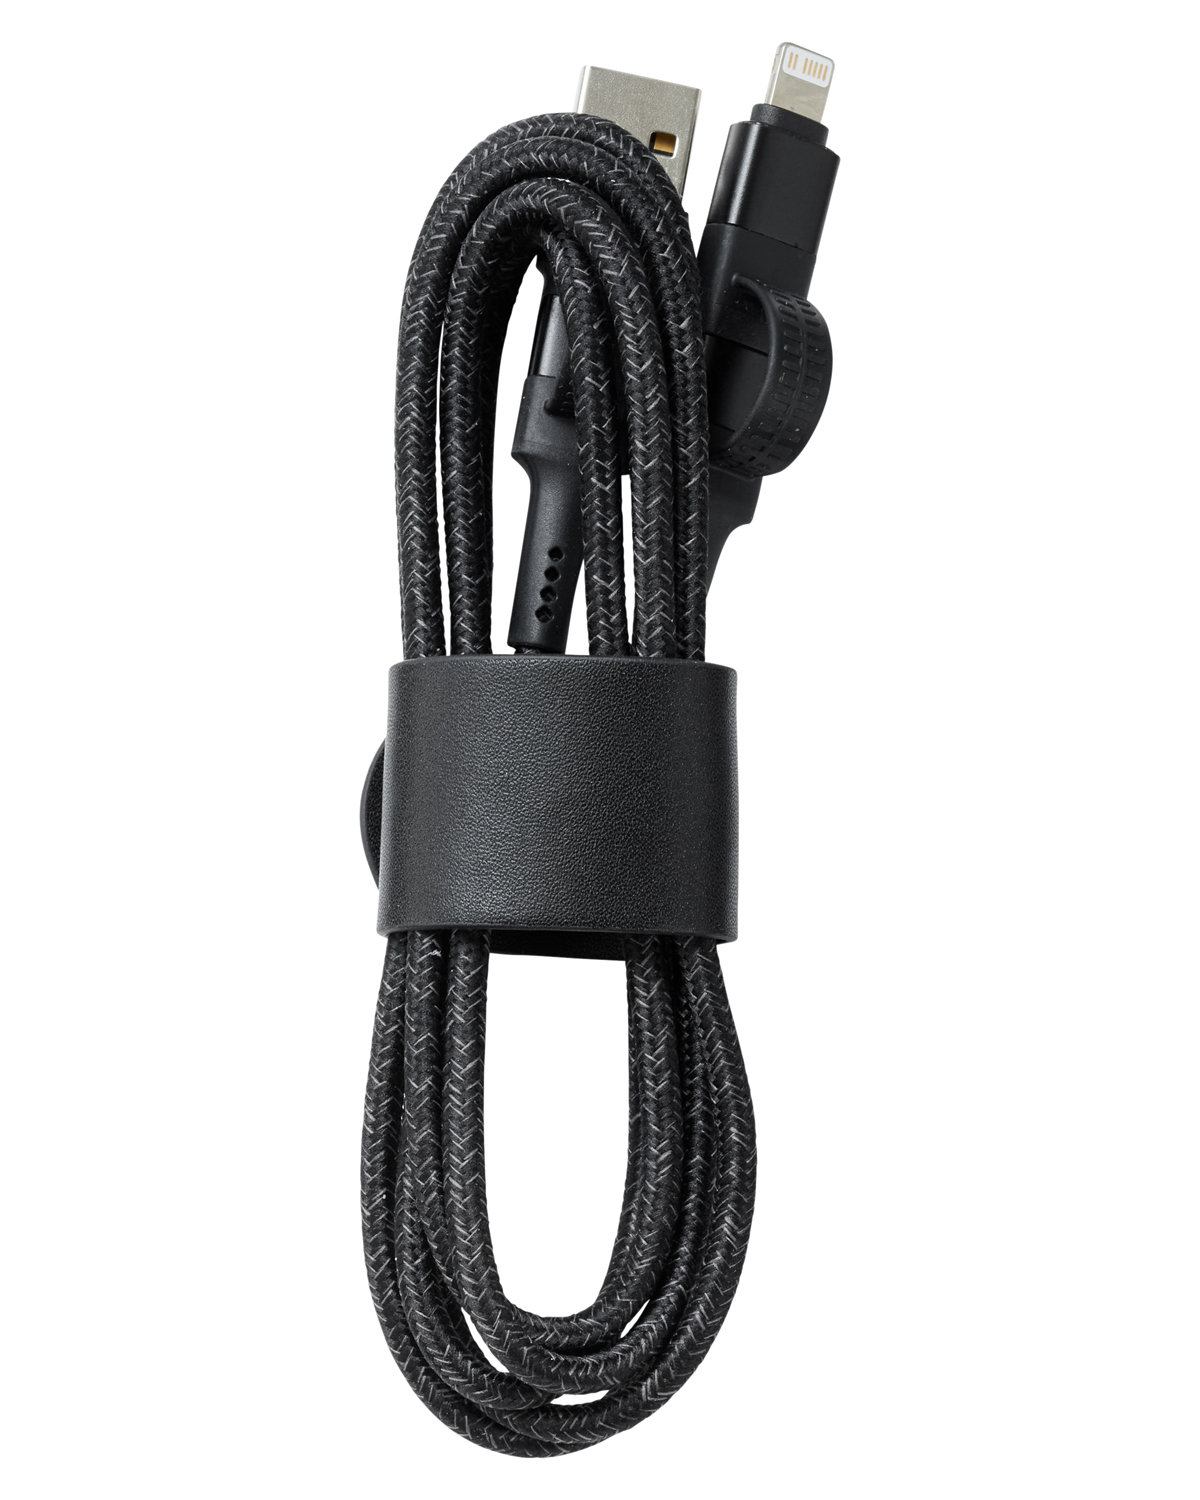 All-In-One Usb-C Cable-Leeman